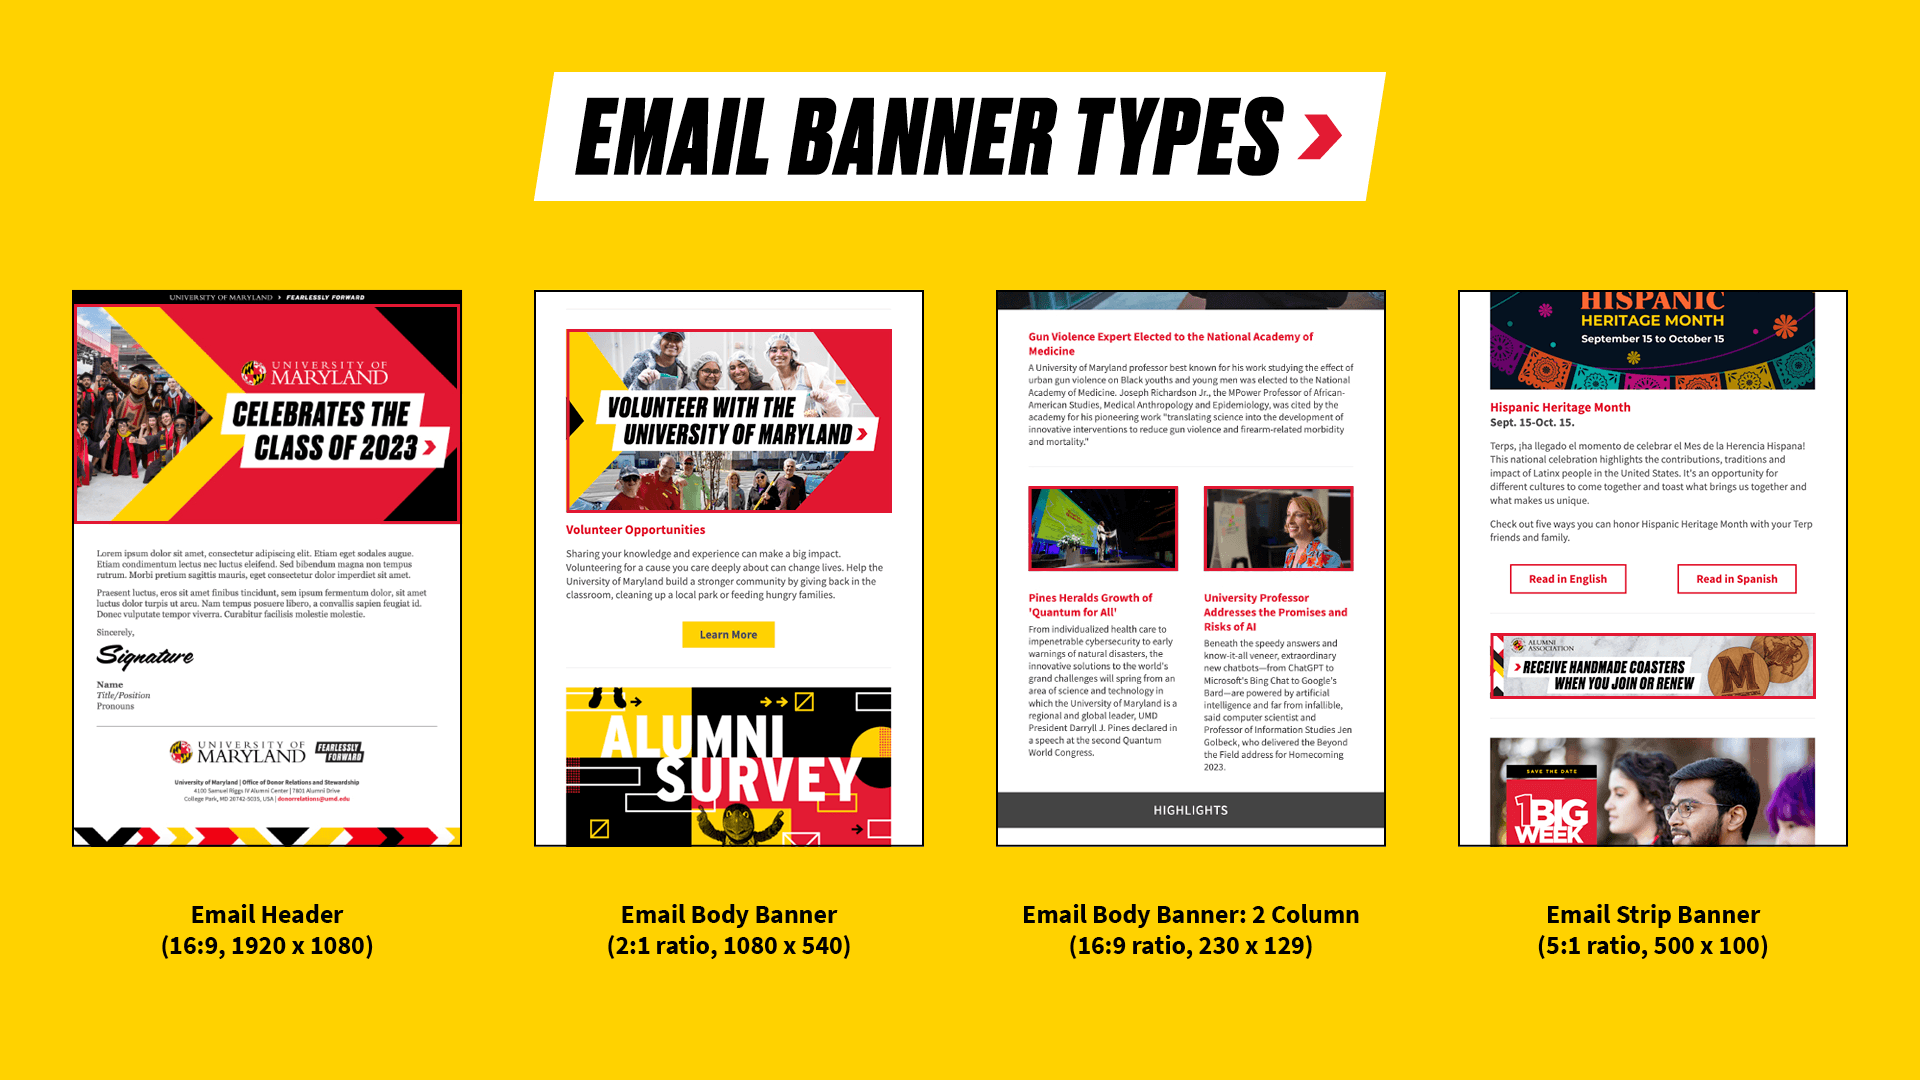 Email Banner Types: Email Header (16:9, 1920 x 1080) | Email Body Banner (2:1 ratio, 1080 x 540) | Email Body Banner: 2 column (16:9 ratio, 230 x 129) | Email Strip Banner (5:1 ratio, 500 x 100)